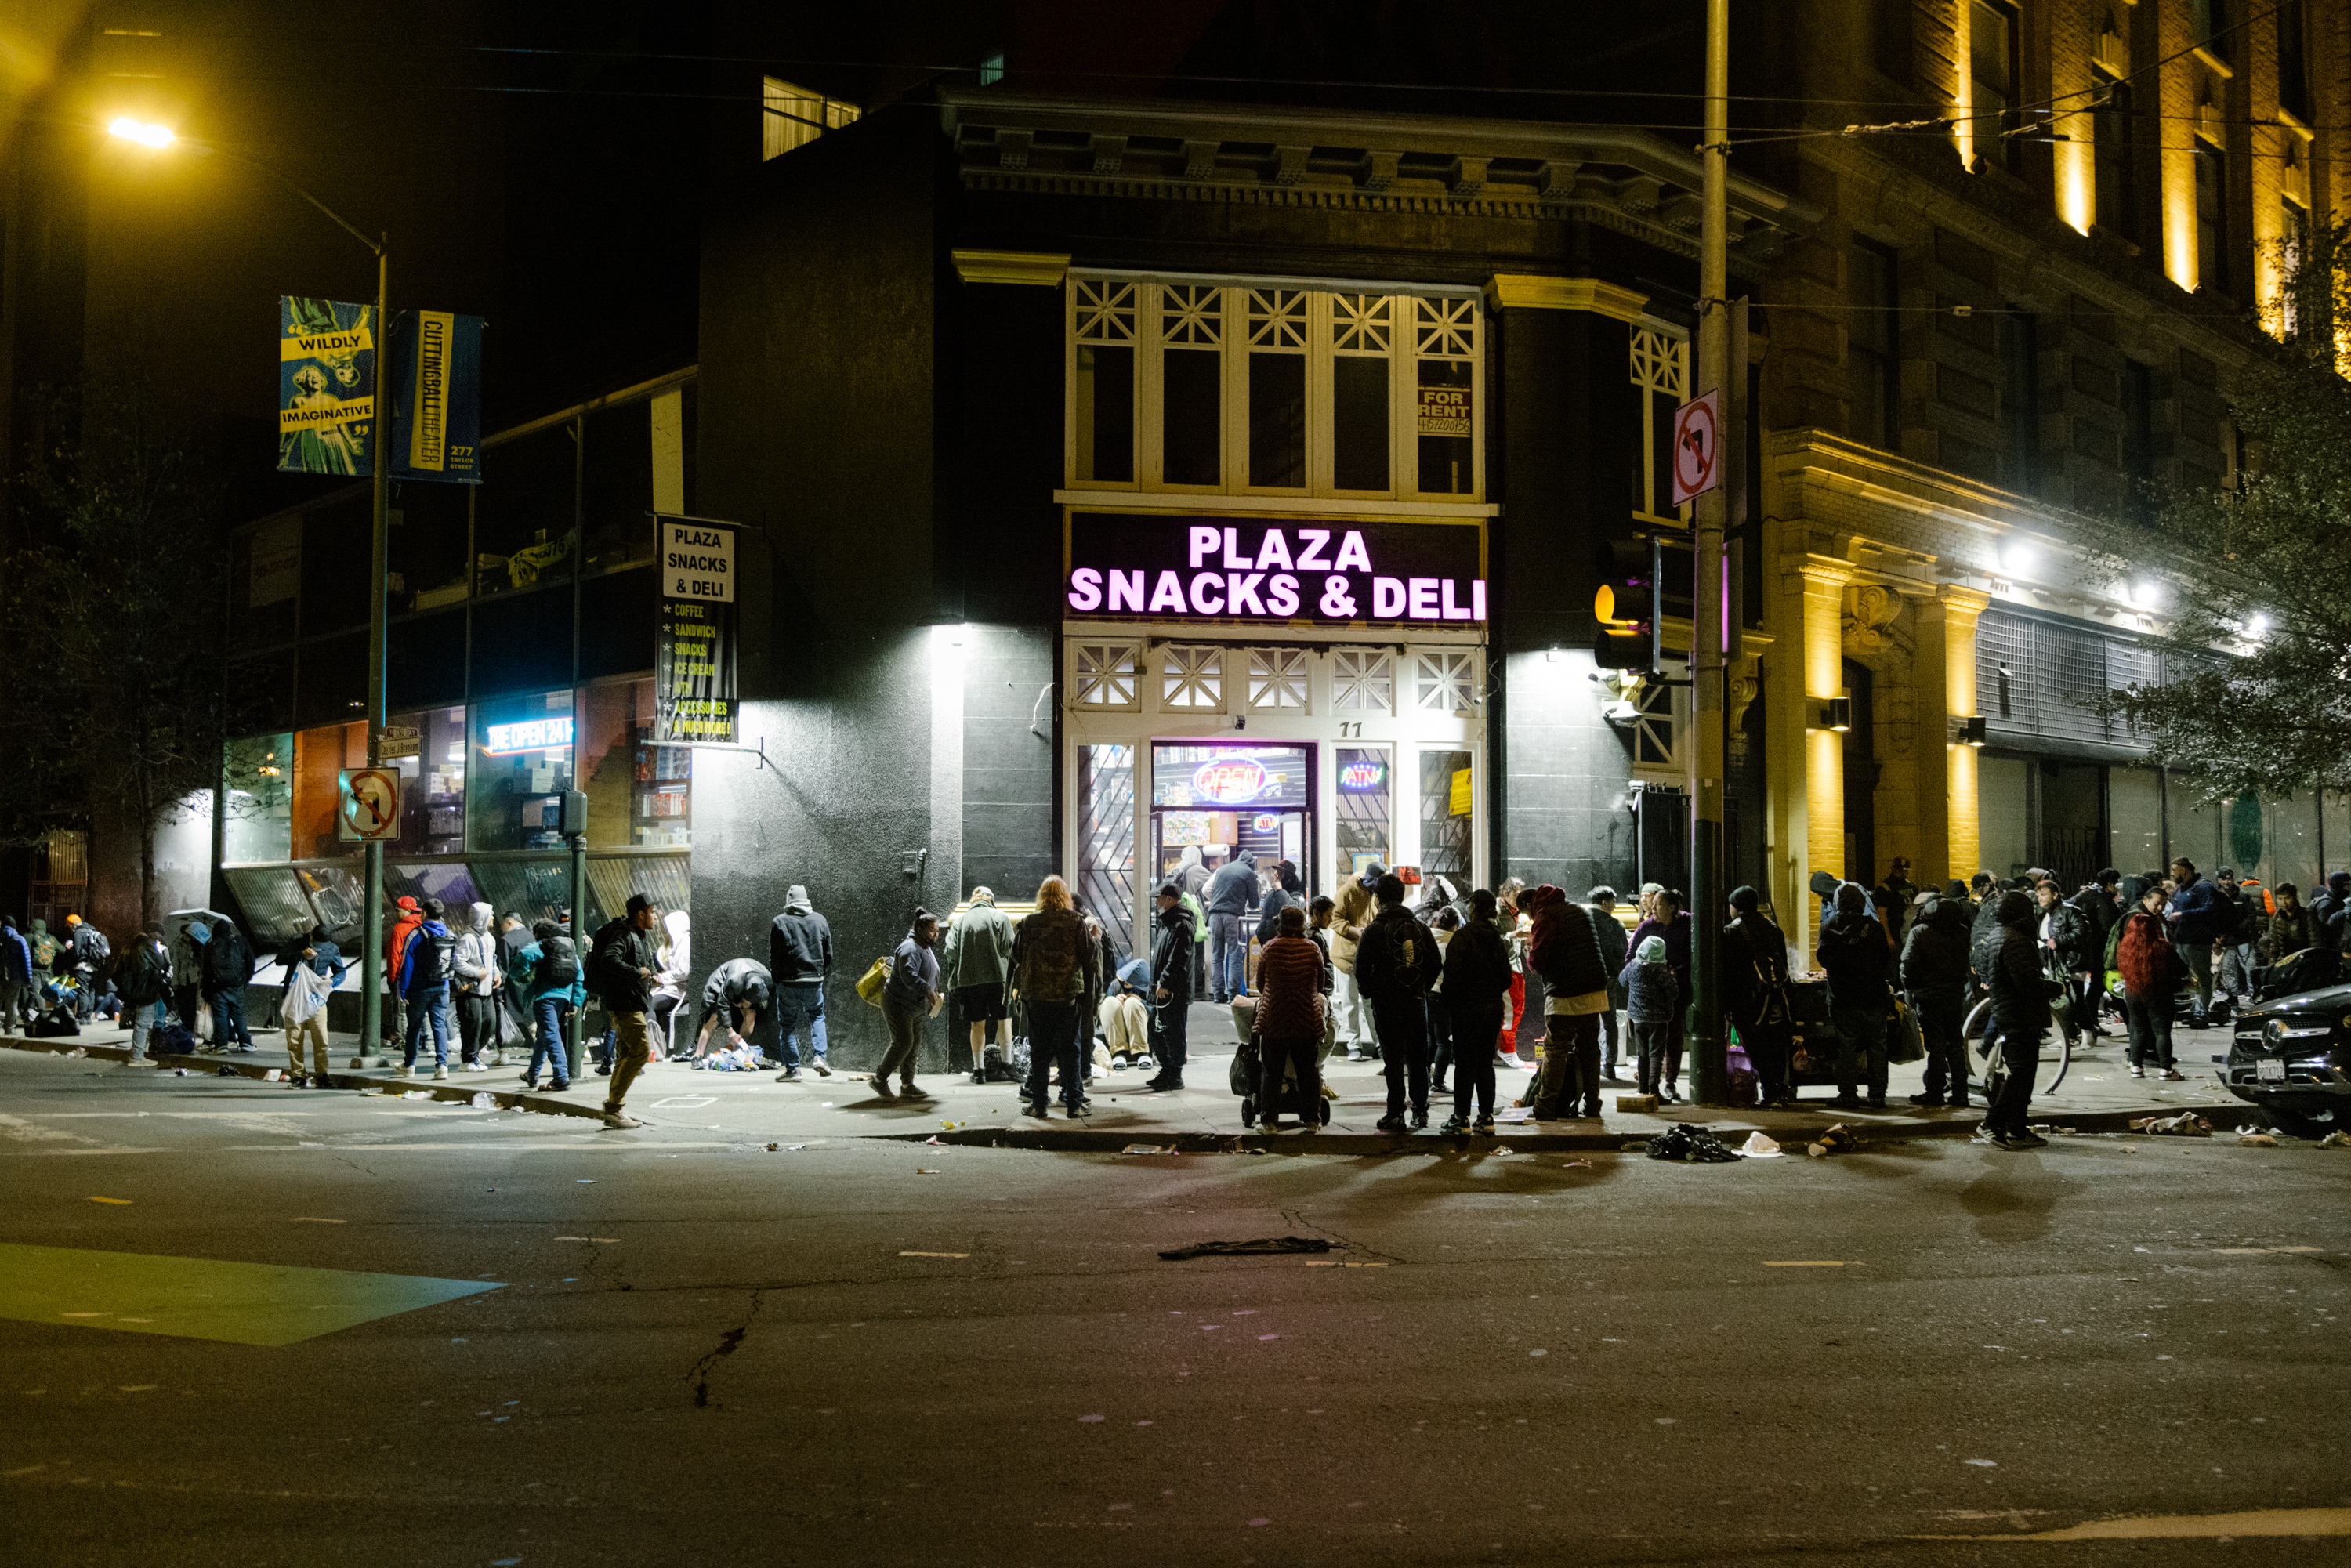 A crowd of people on the streets outside of a convenience store at night.